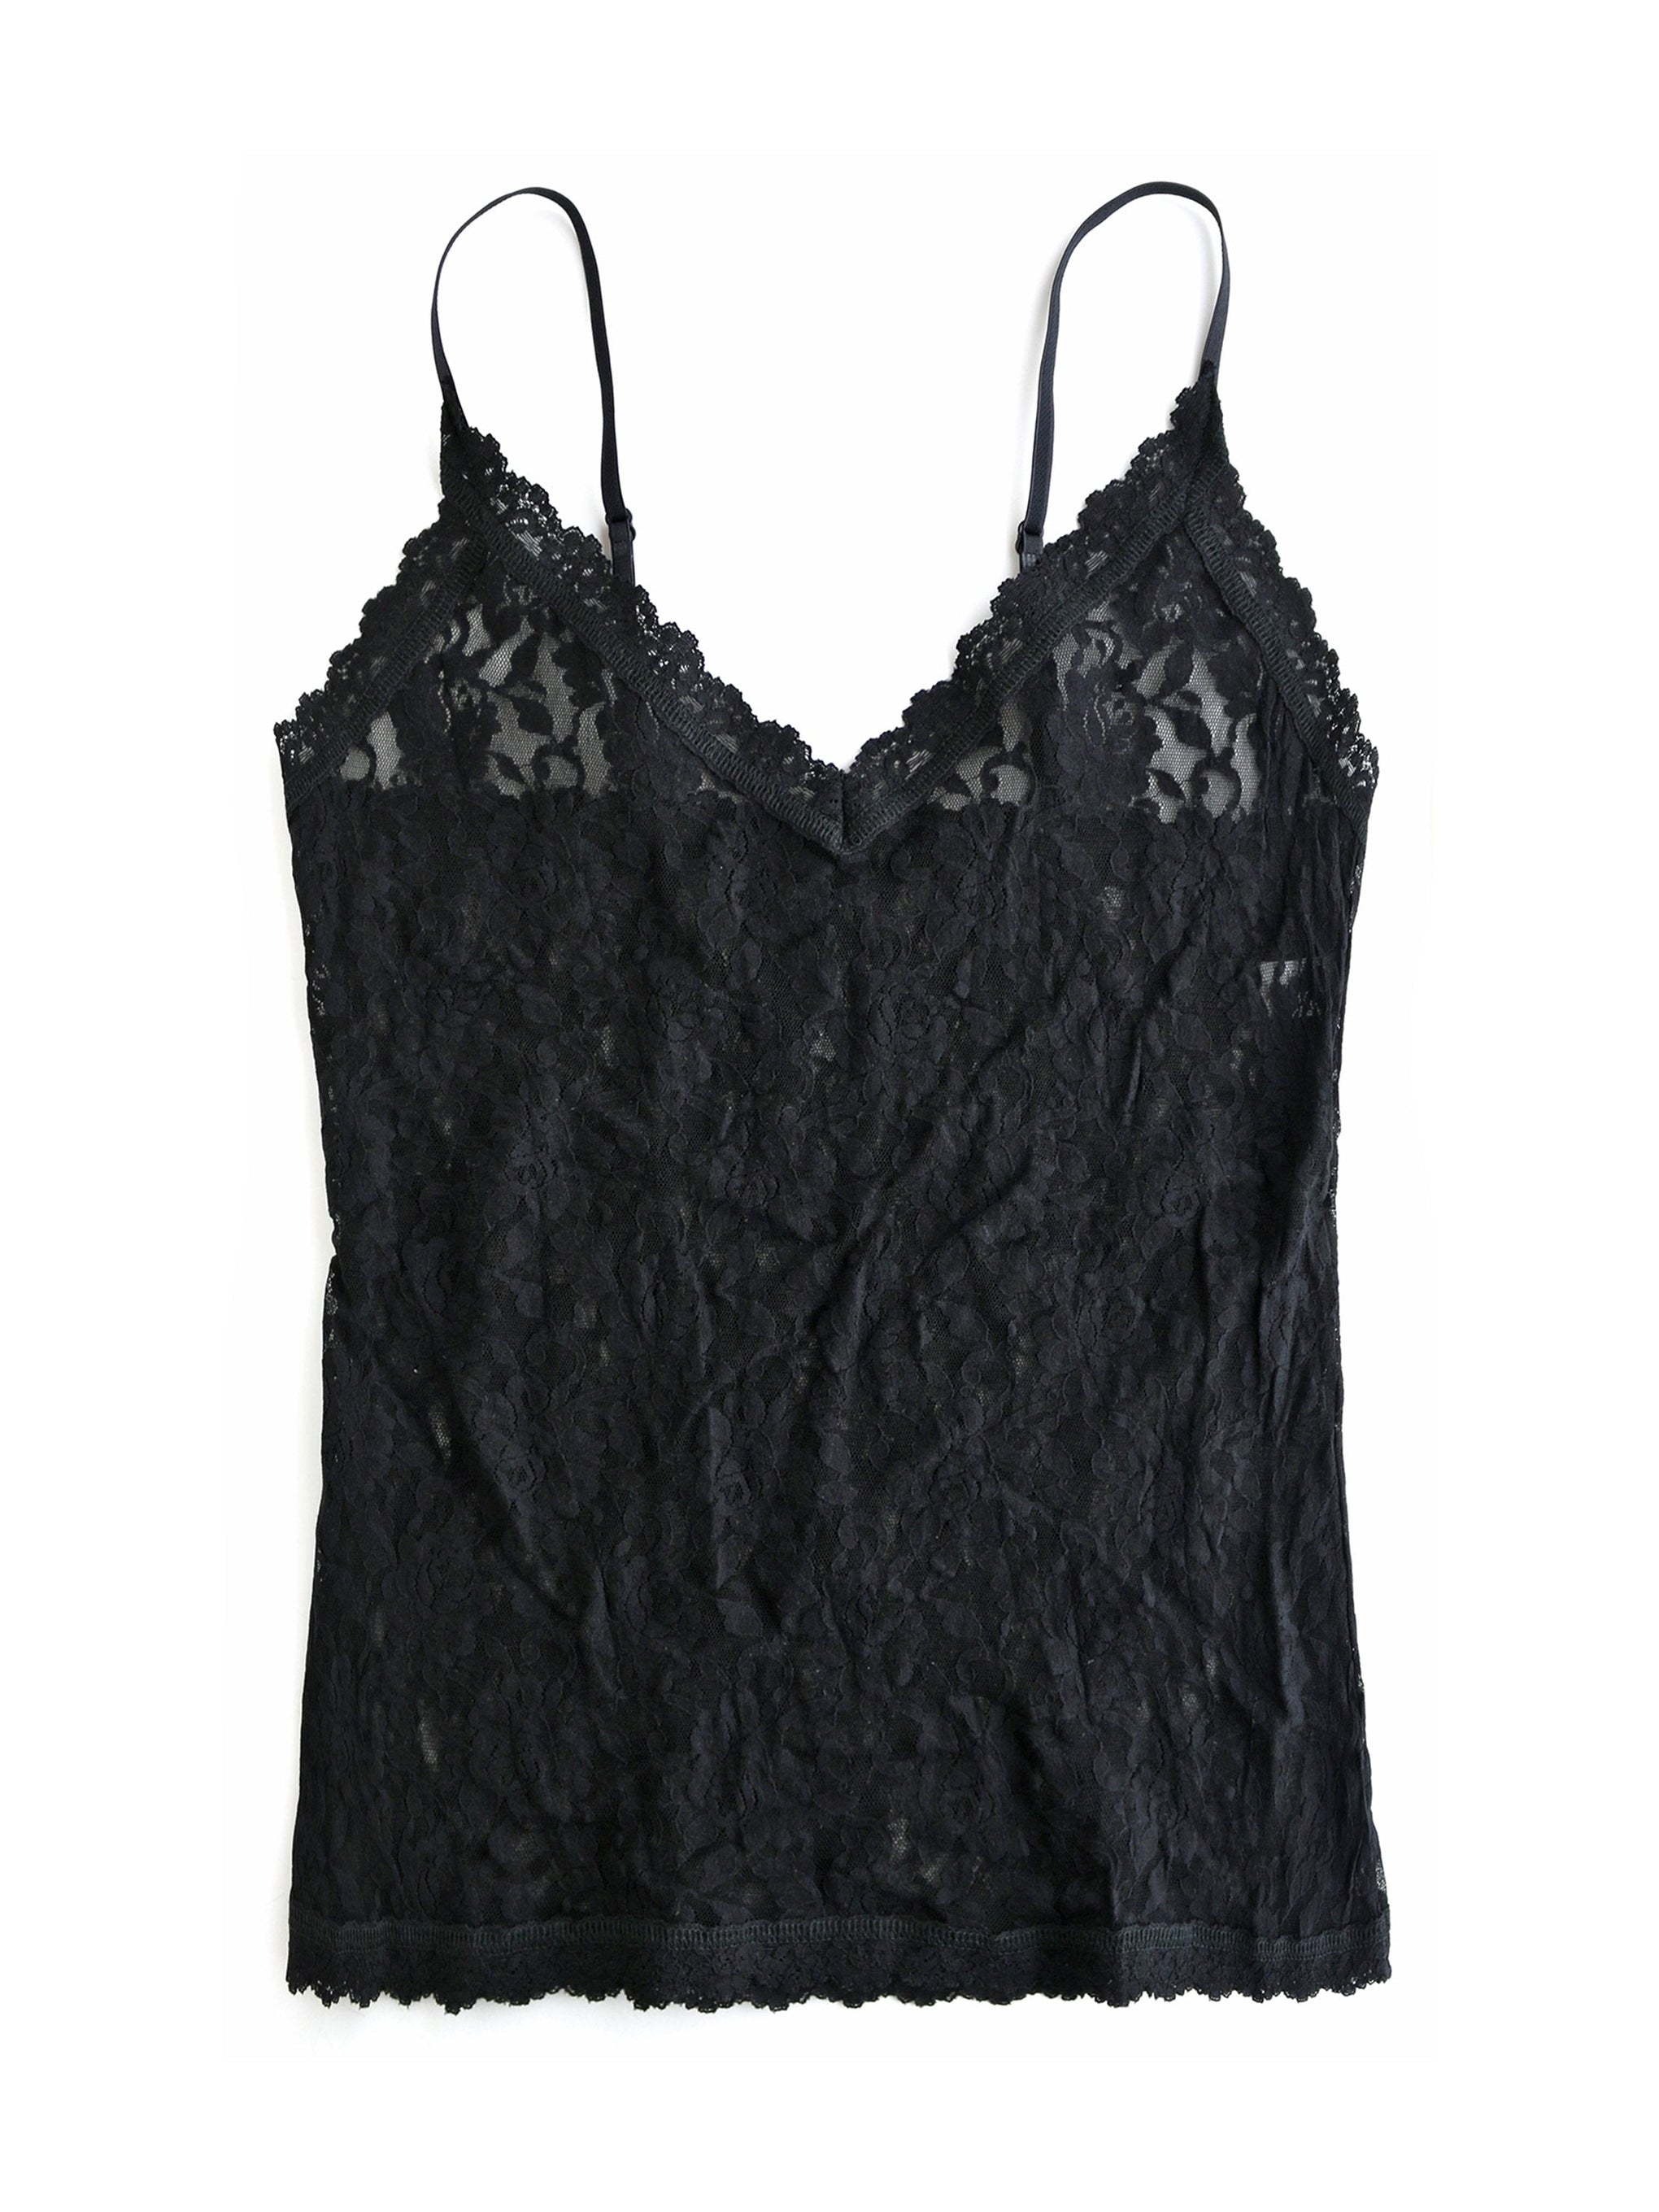 Black Lace Camisoles - Shopping and Info